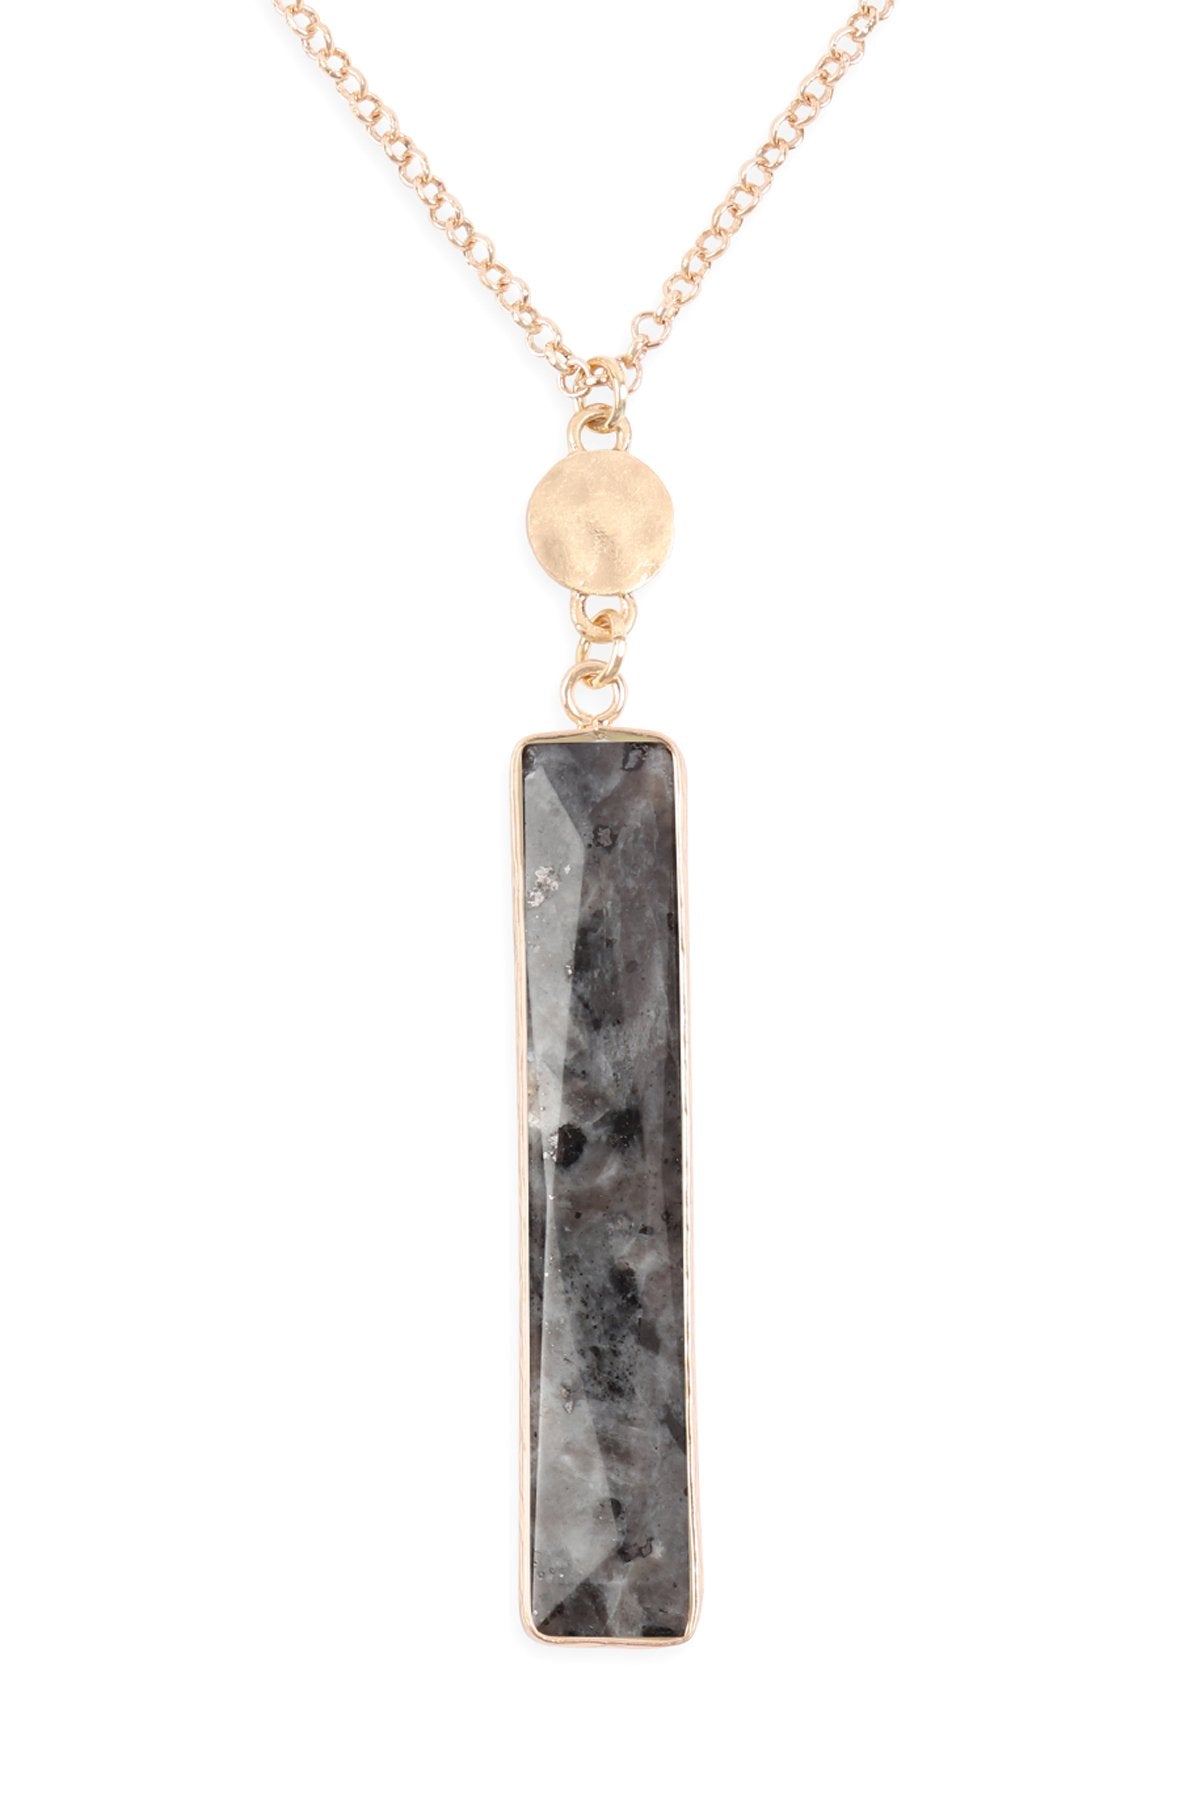 Hdn3116 - Bar Natural Stone Pendant Chain Necklace - LOLA LUXE